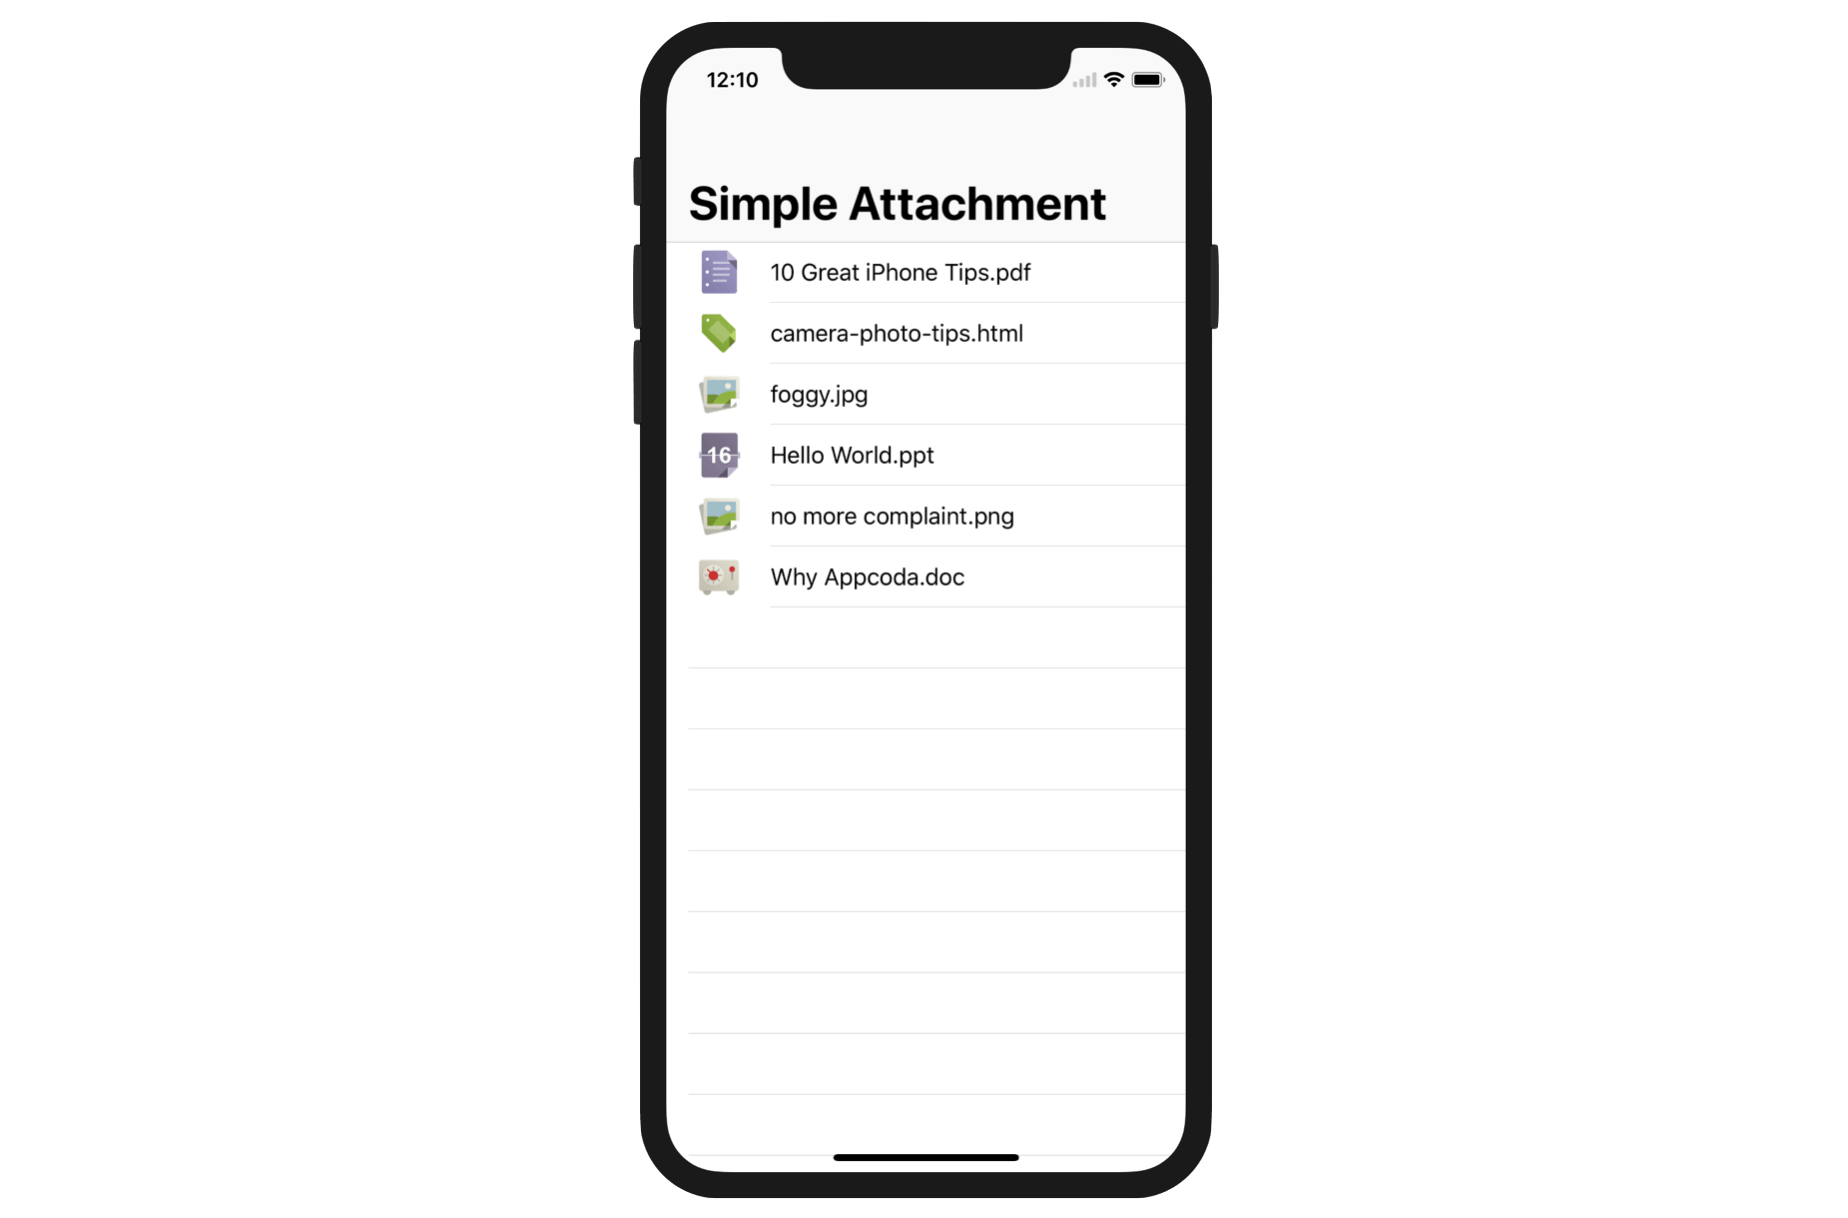 Figure 6.1. The demo app showing a list of attachments